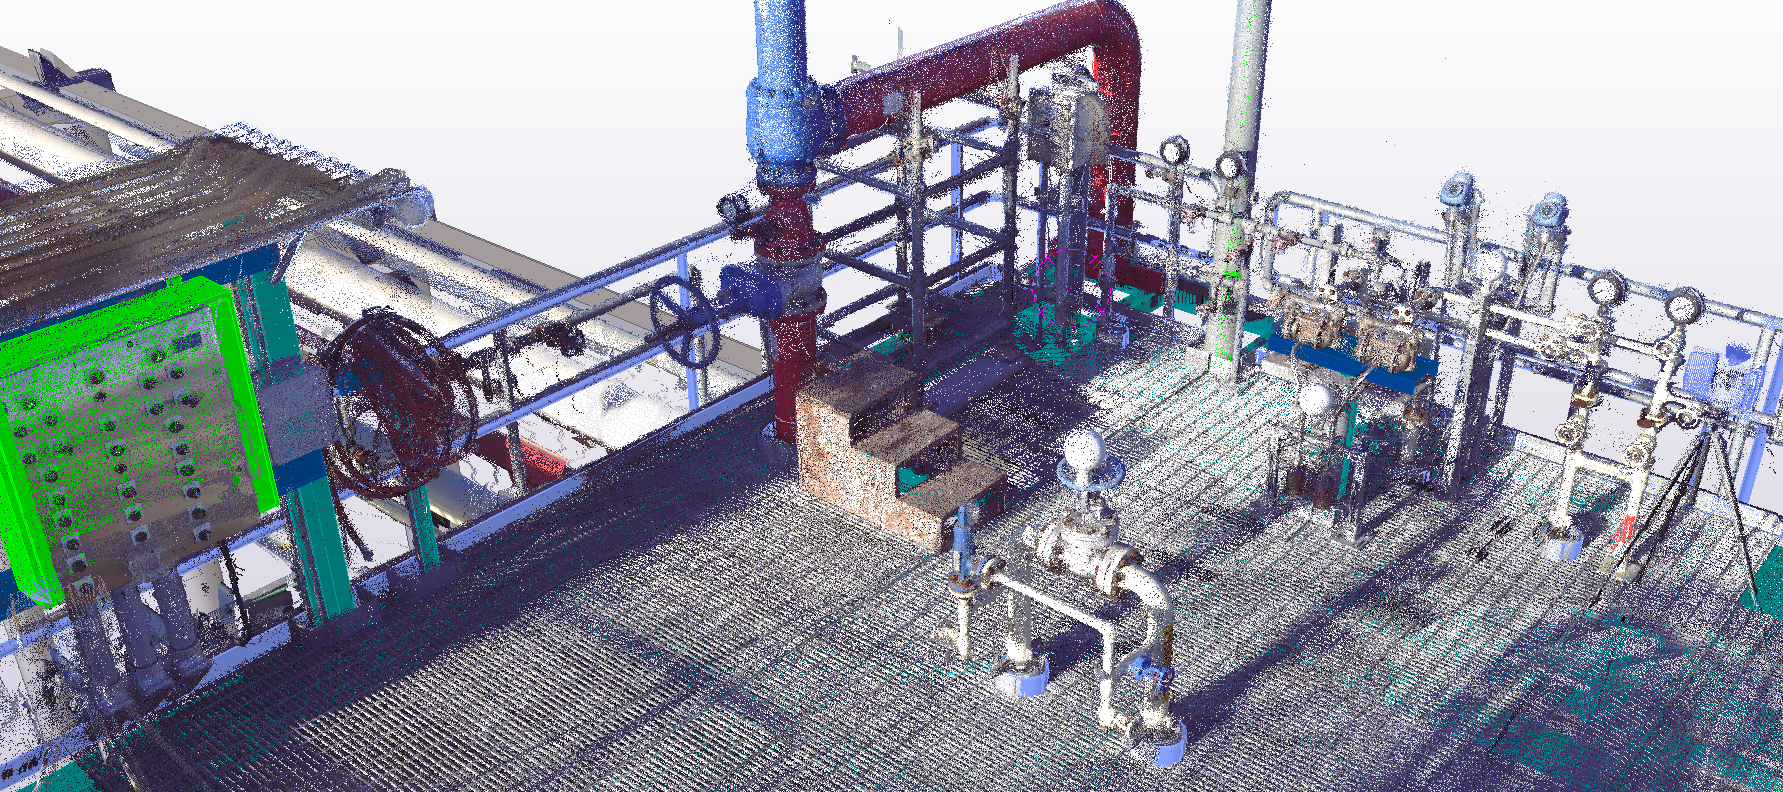 A typical industrial platform model overlaid with a laser scan